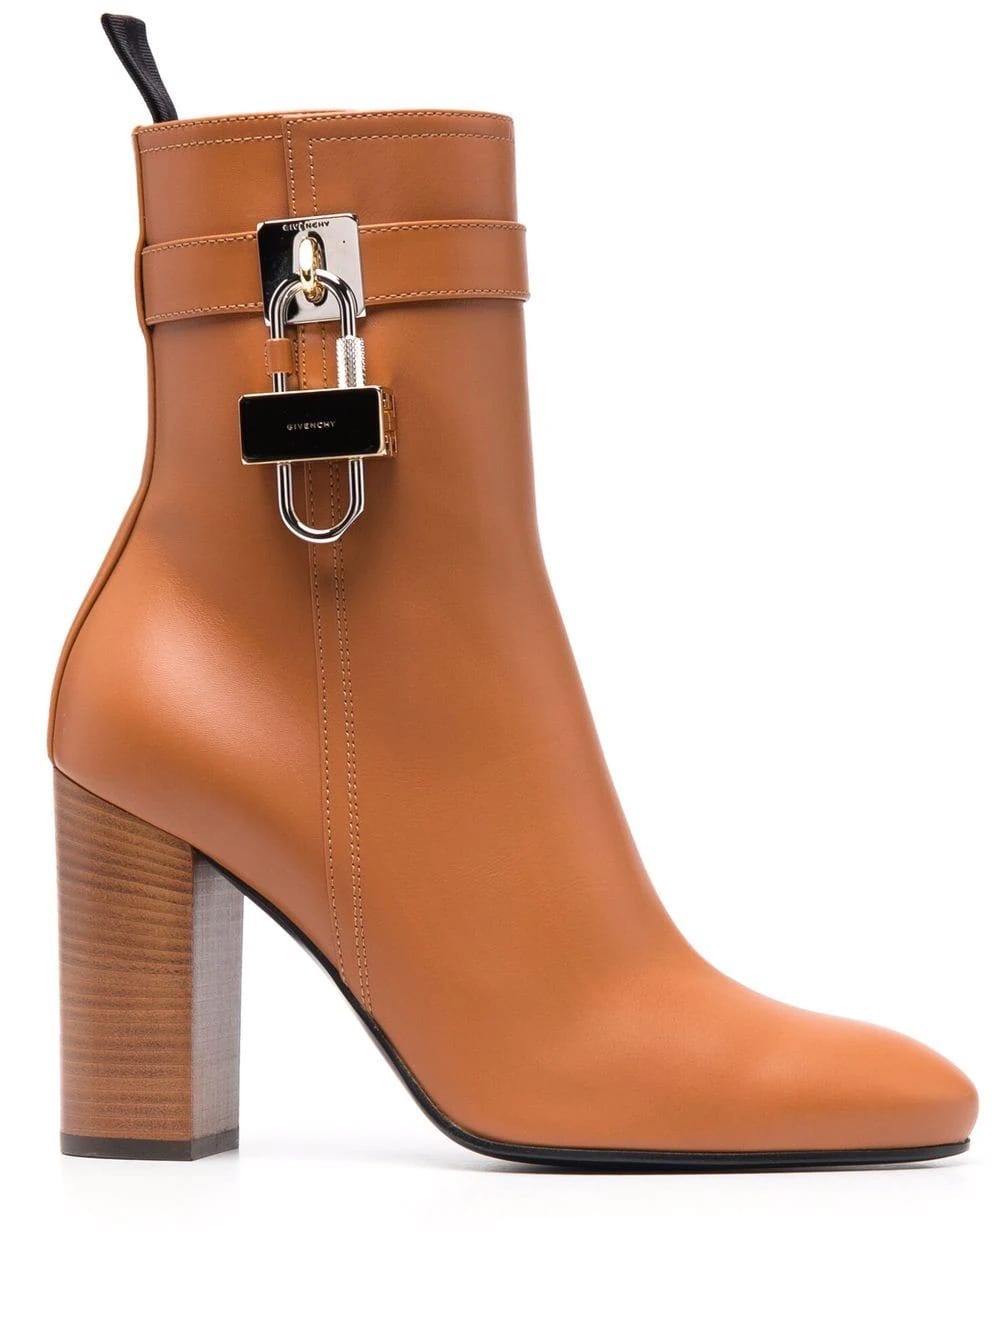 Buy Givenchy Light Brown Leather Ankle Boot With Padlock online, shop Givenchy shoes with free shipping